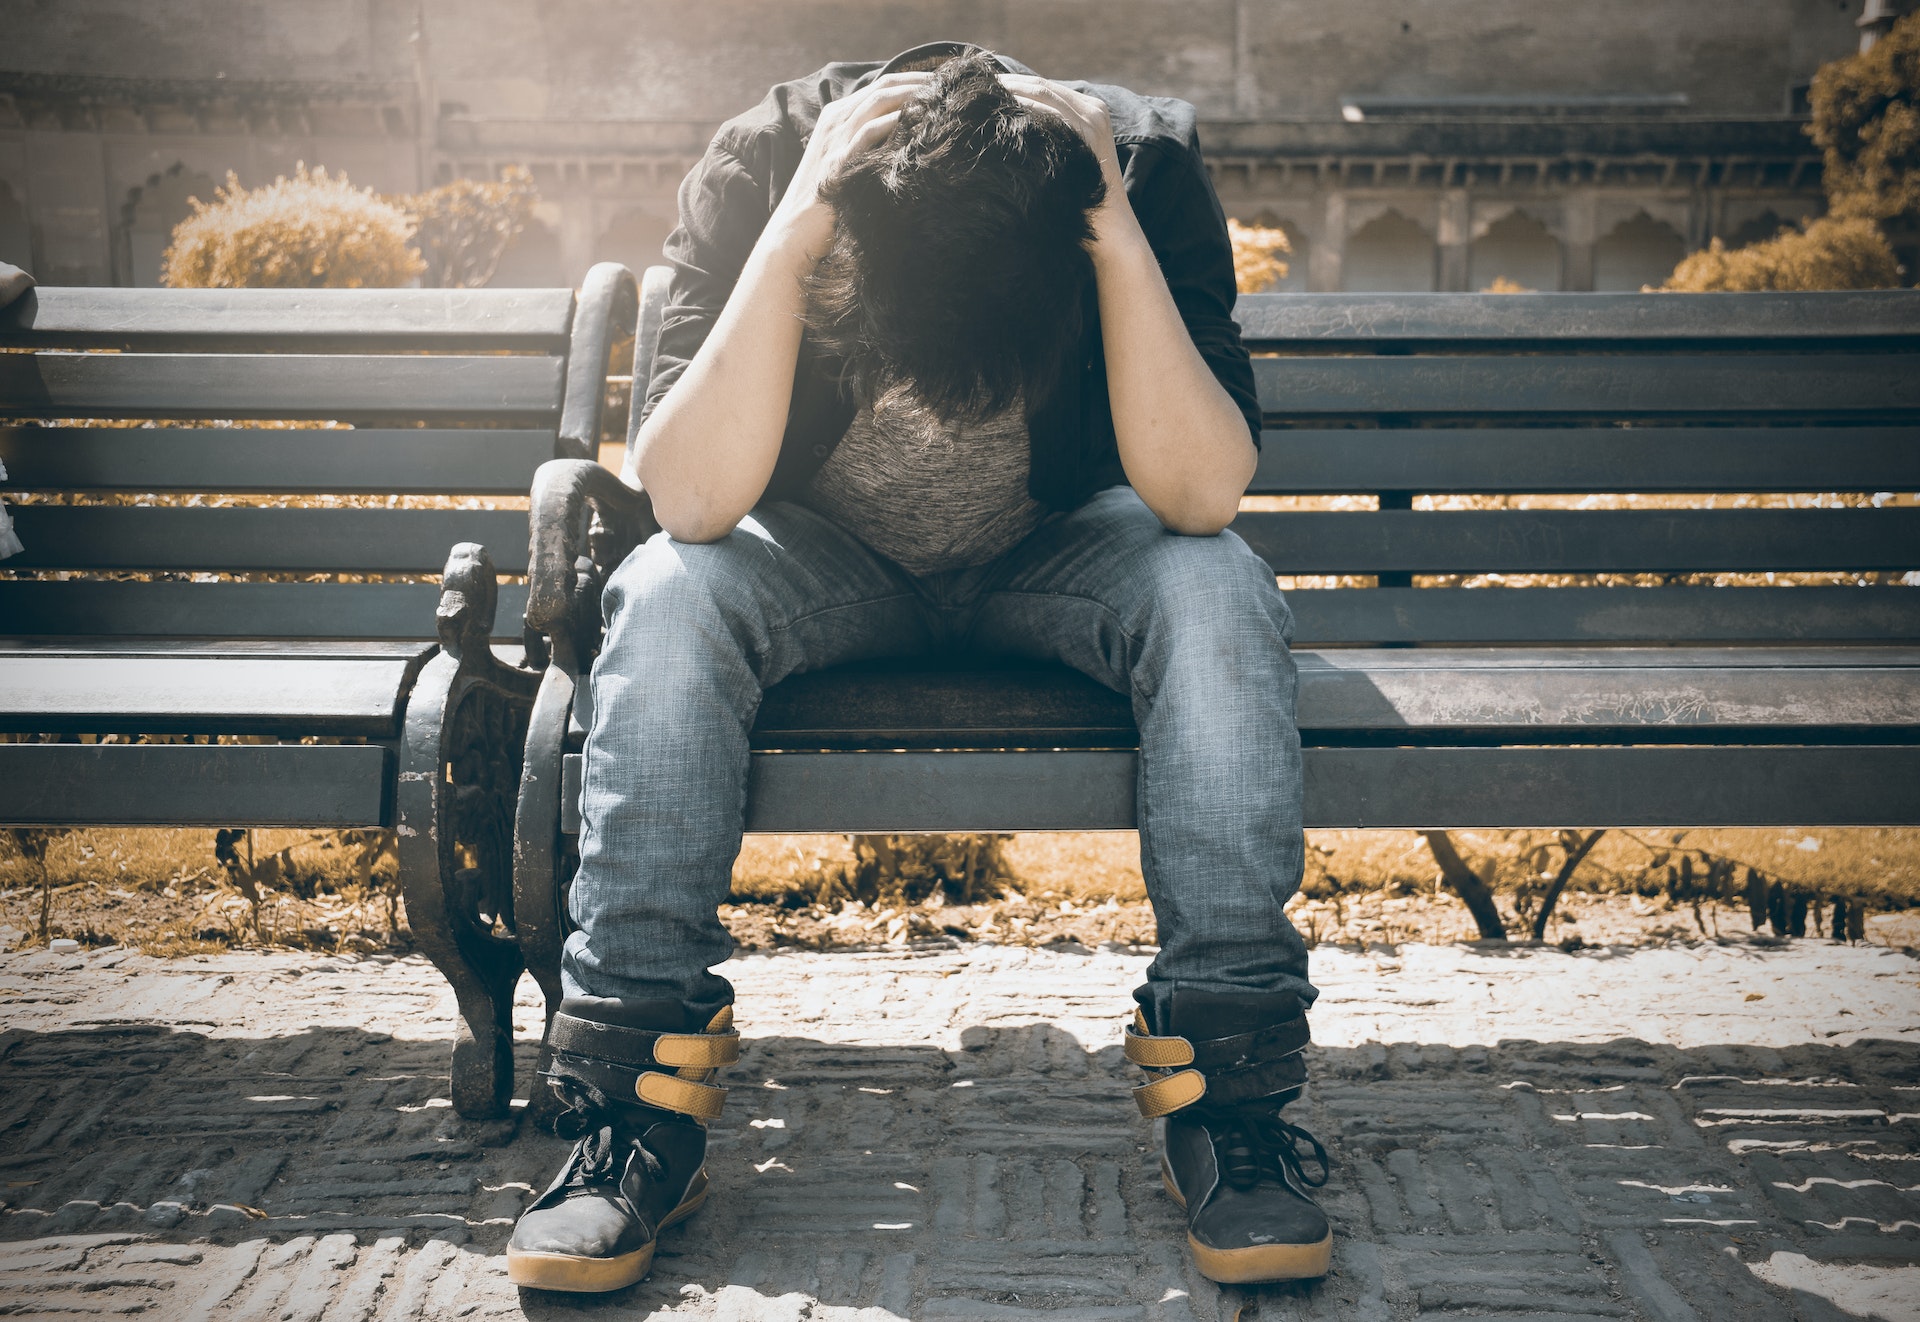 A stressed man looking down while sitting on a bench | Source: Pexels